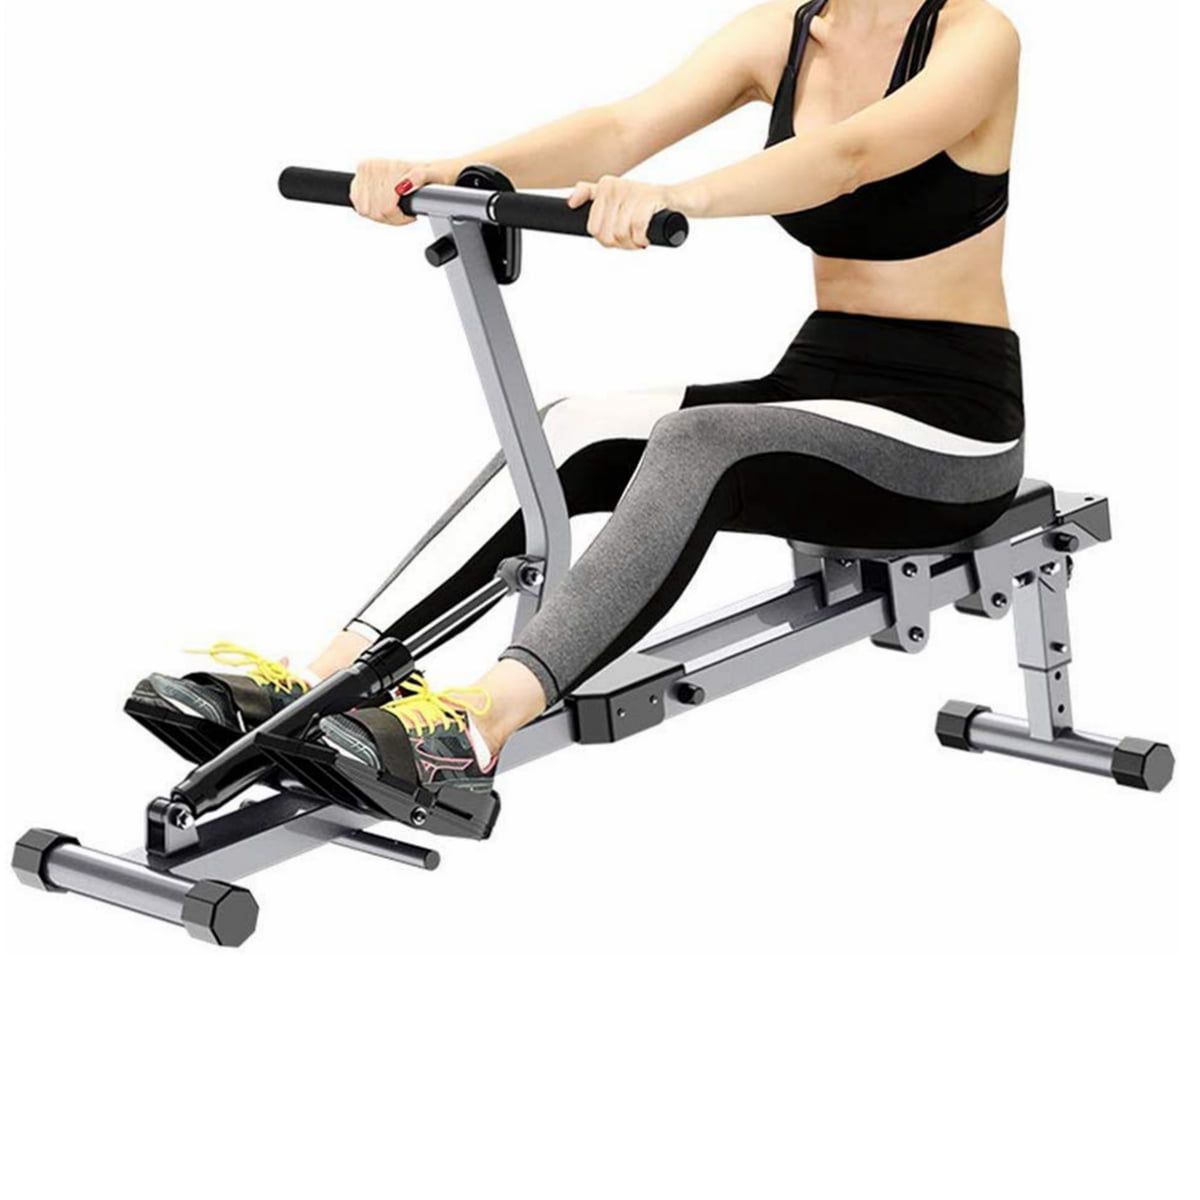 Details about   Hydraulic Rower Rowing Machine Adjustable Incline & 12 Resistance Cylinder USA 